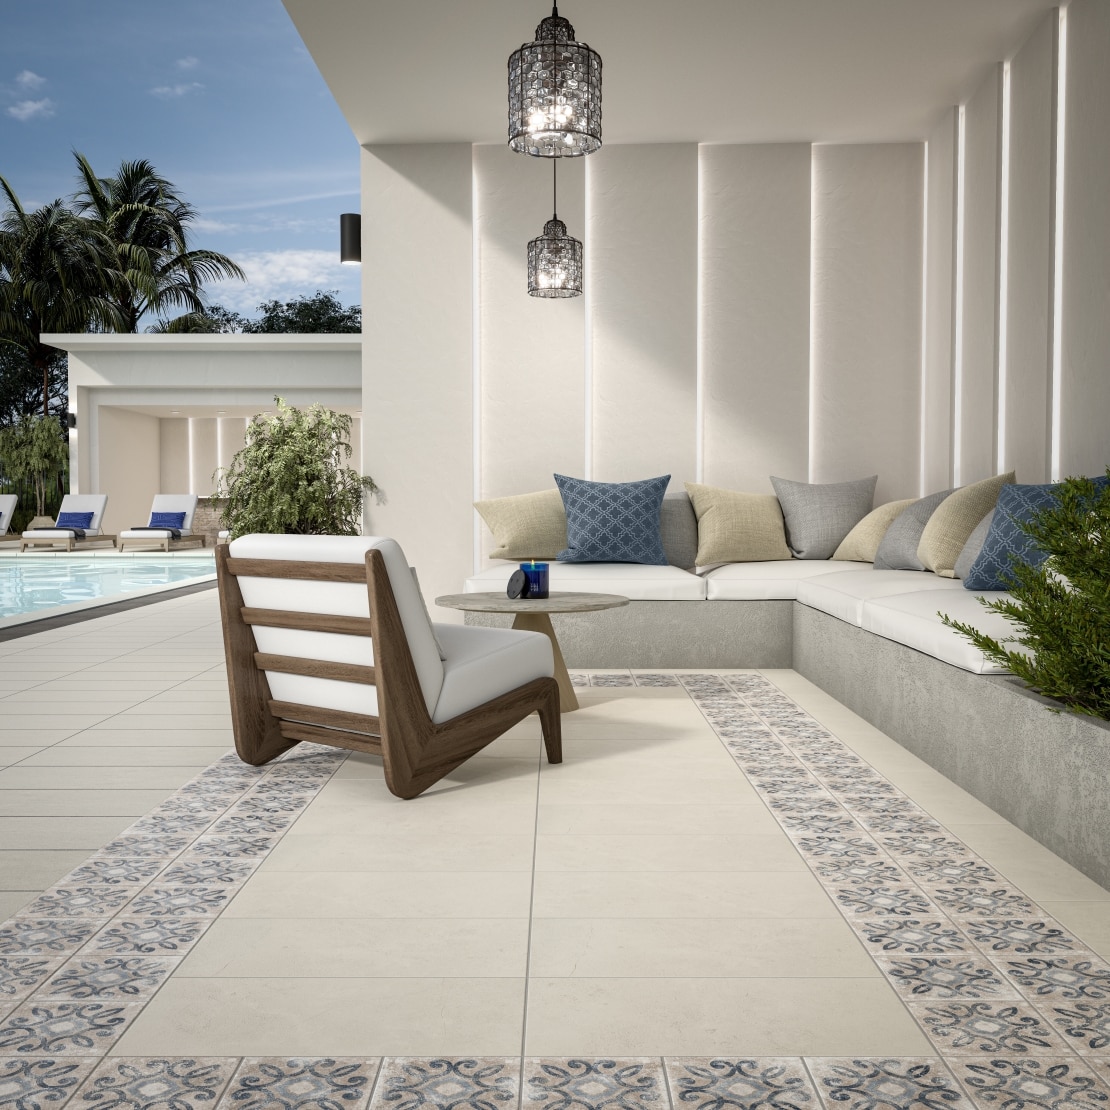 Cabana section next to the pool with encaustic tiles surrounding the area.